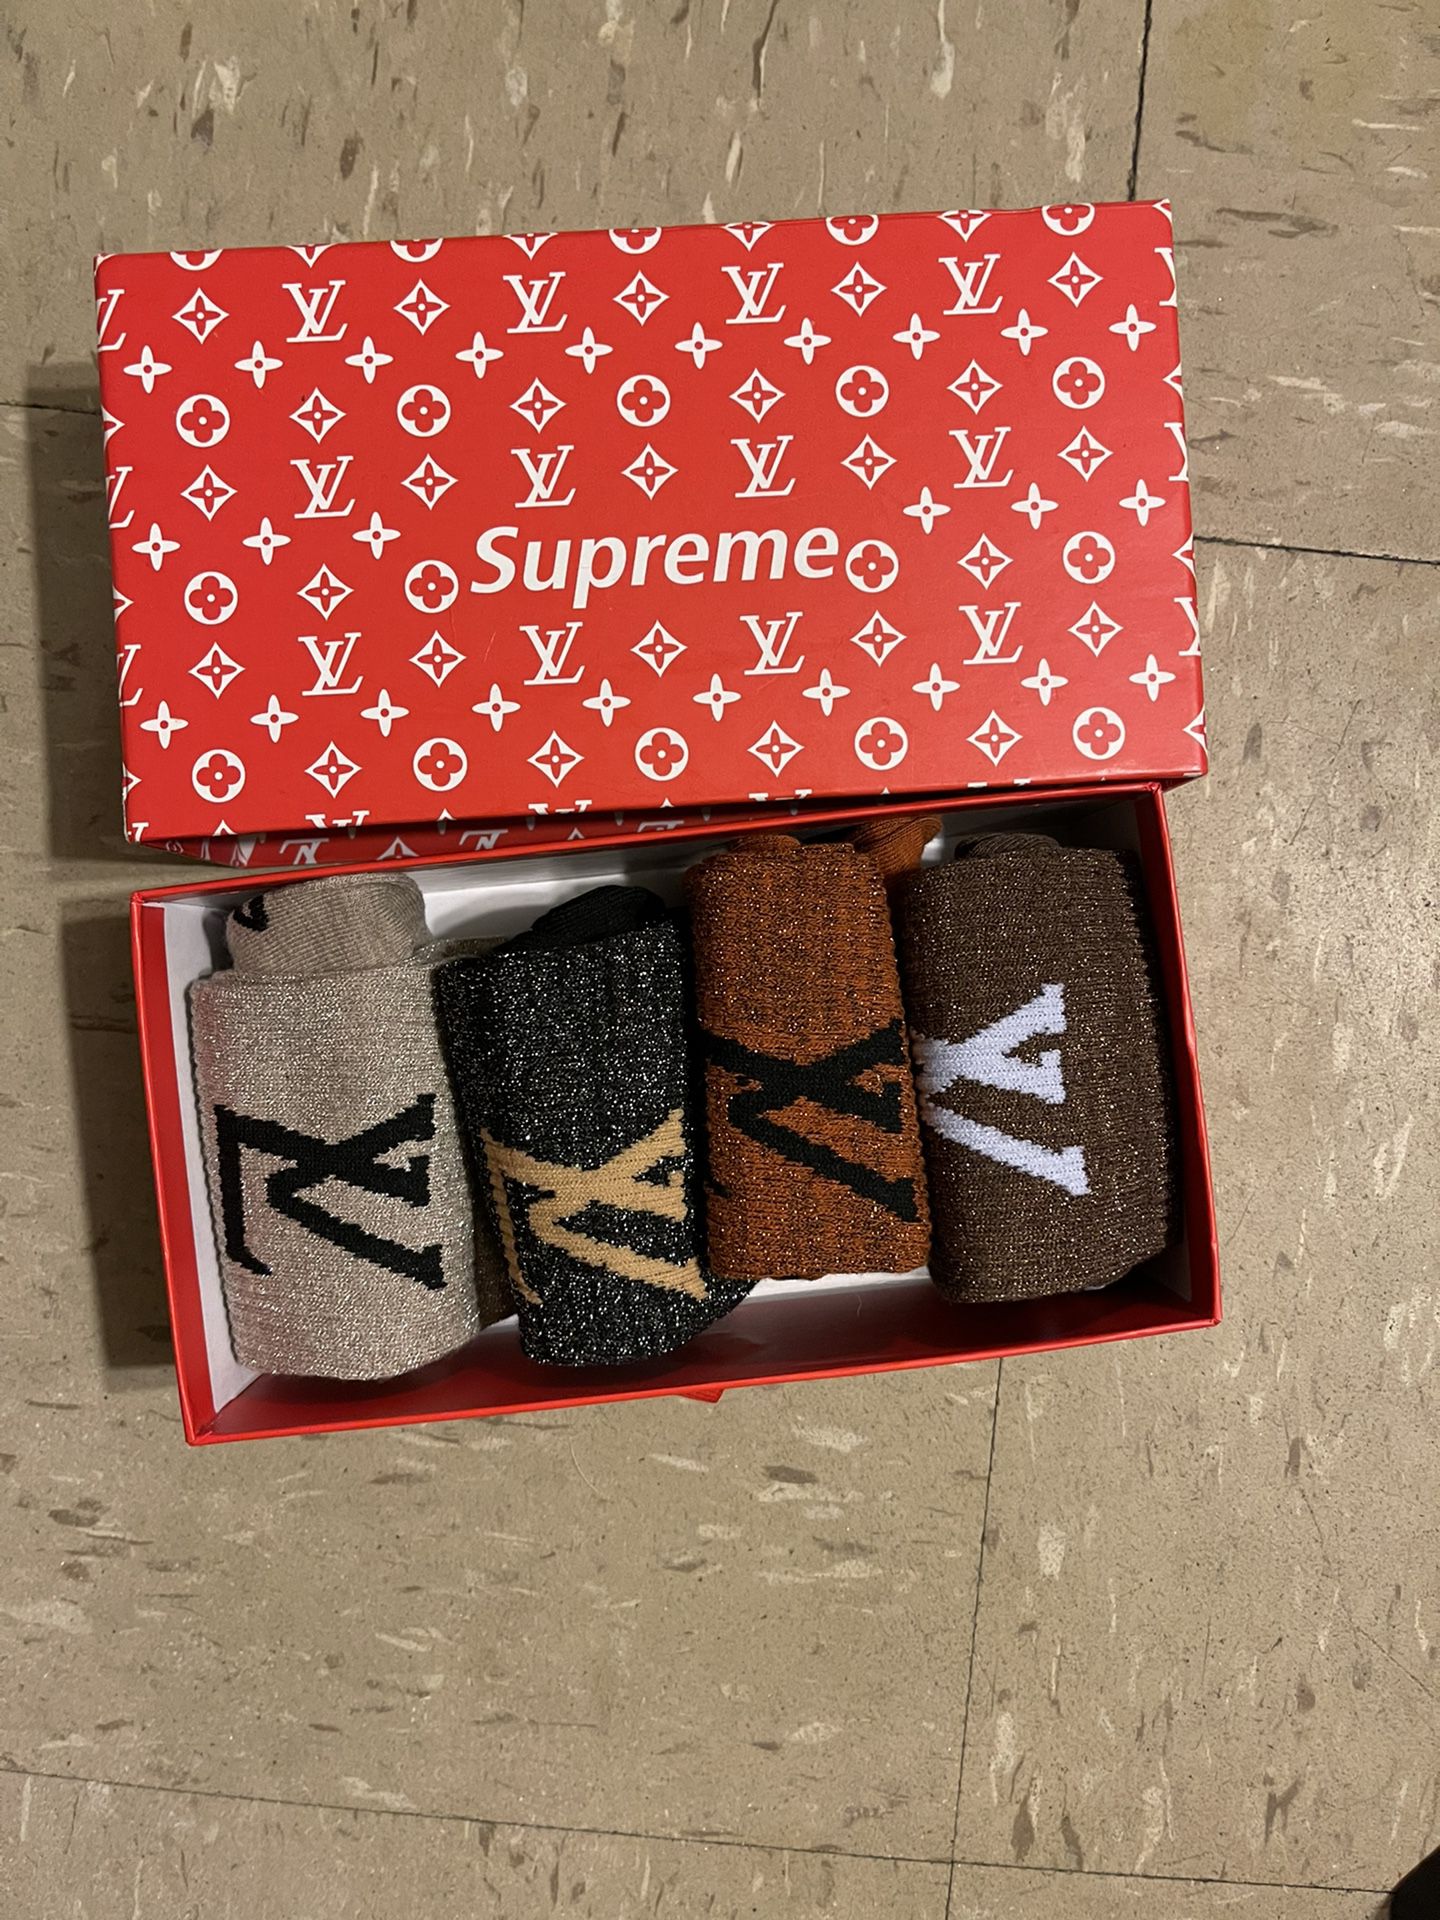 Best Louis Vuitton Supreme Socks for sale in San Clemente, California for  2023